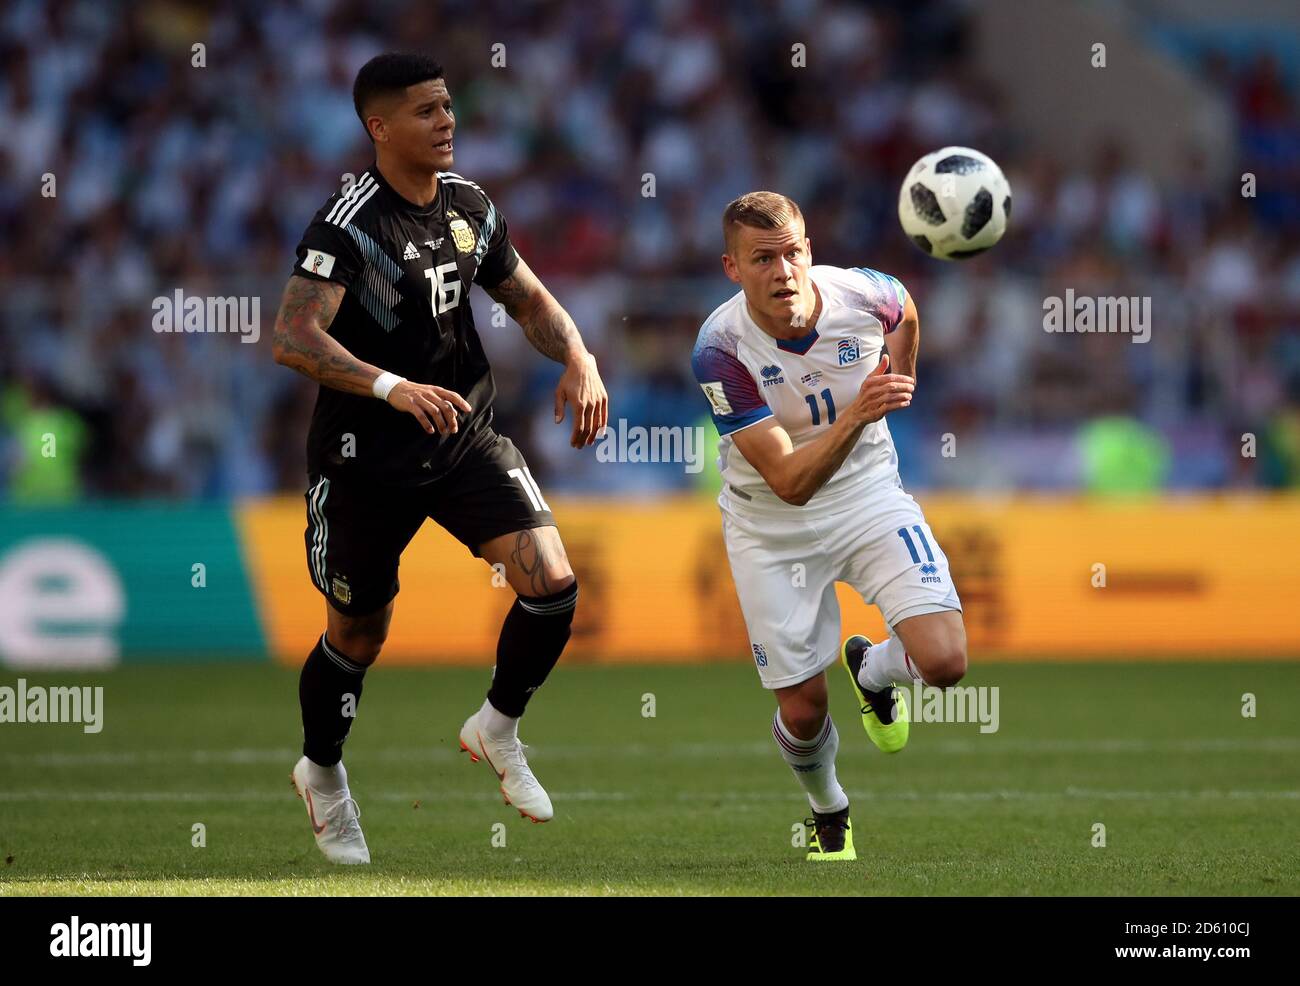 Argentina's Marcos Rojo (left) and Iceland's Alfred Finnbogason battle for the ball Stock Photo